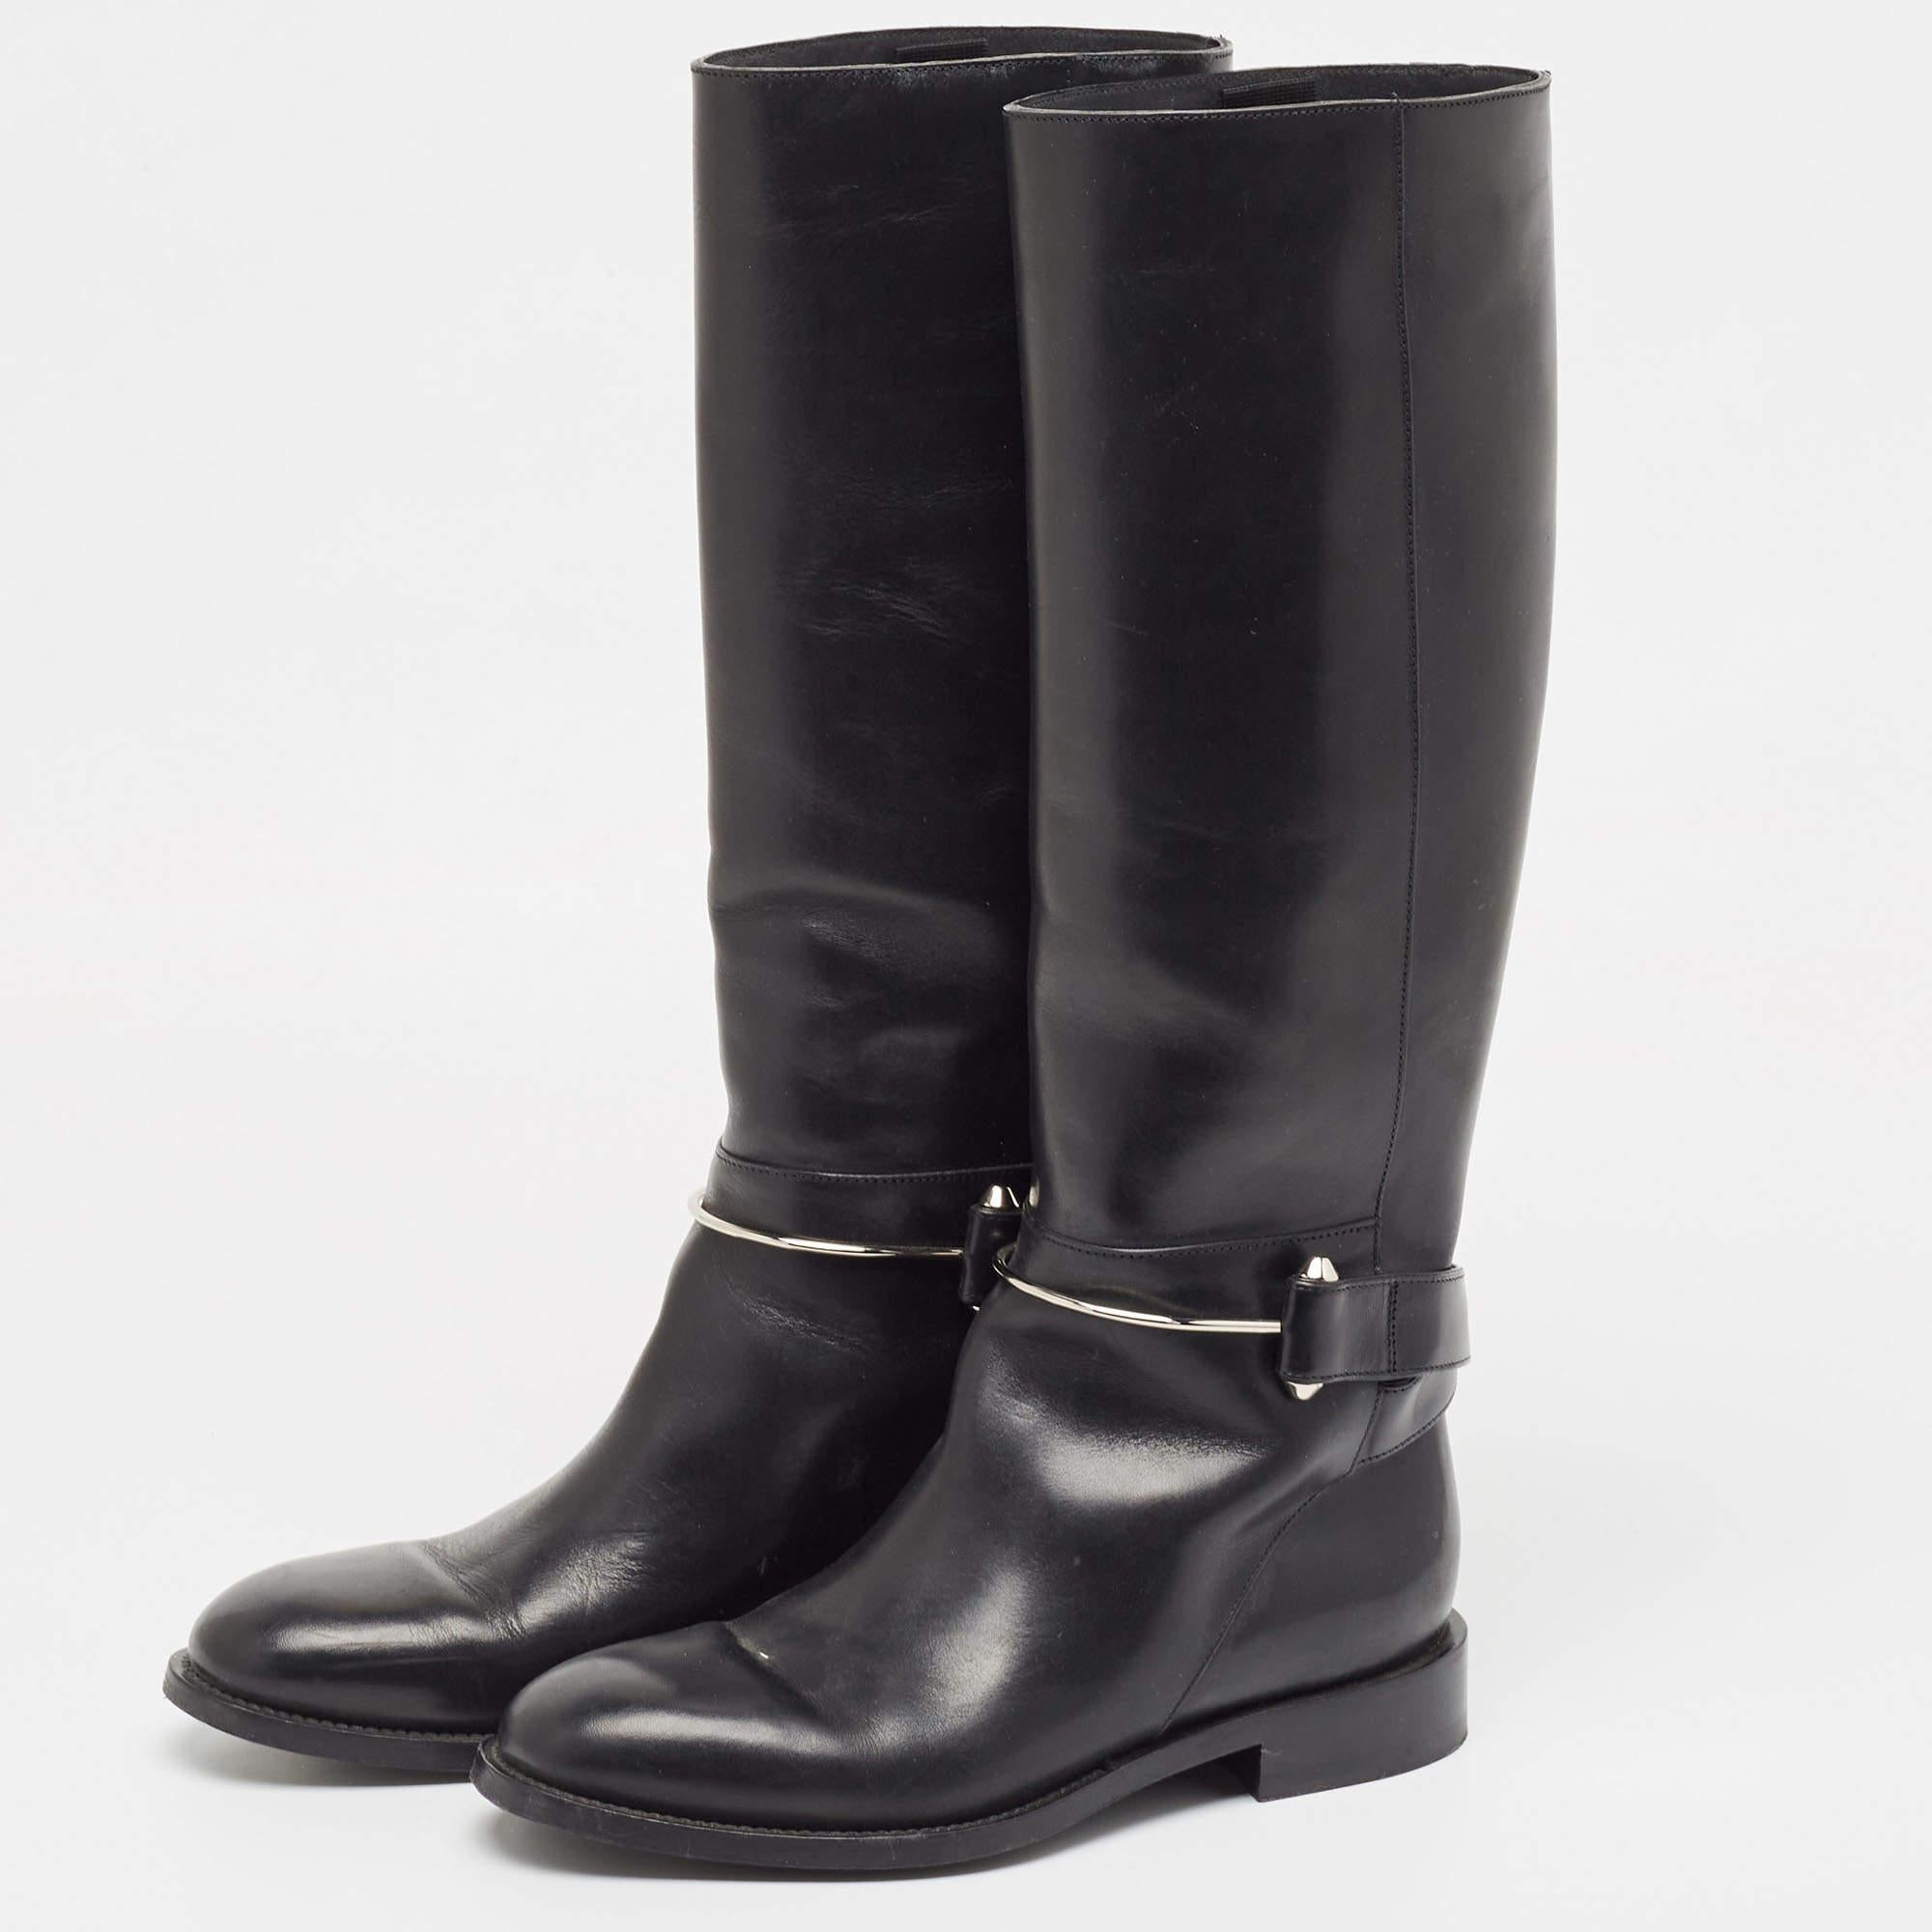 Balenciaga Black Leather Knee Length Boots Size 37 For Sale 4